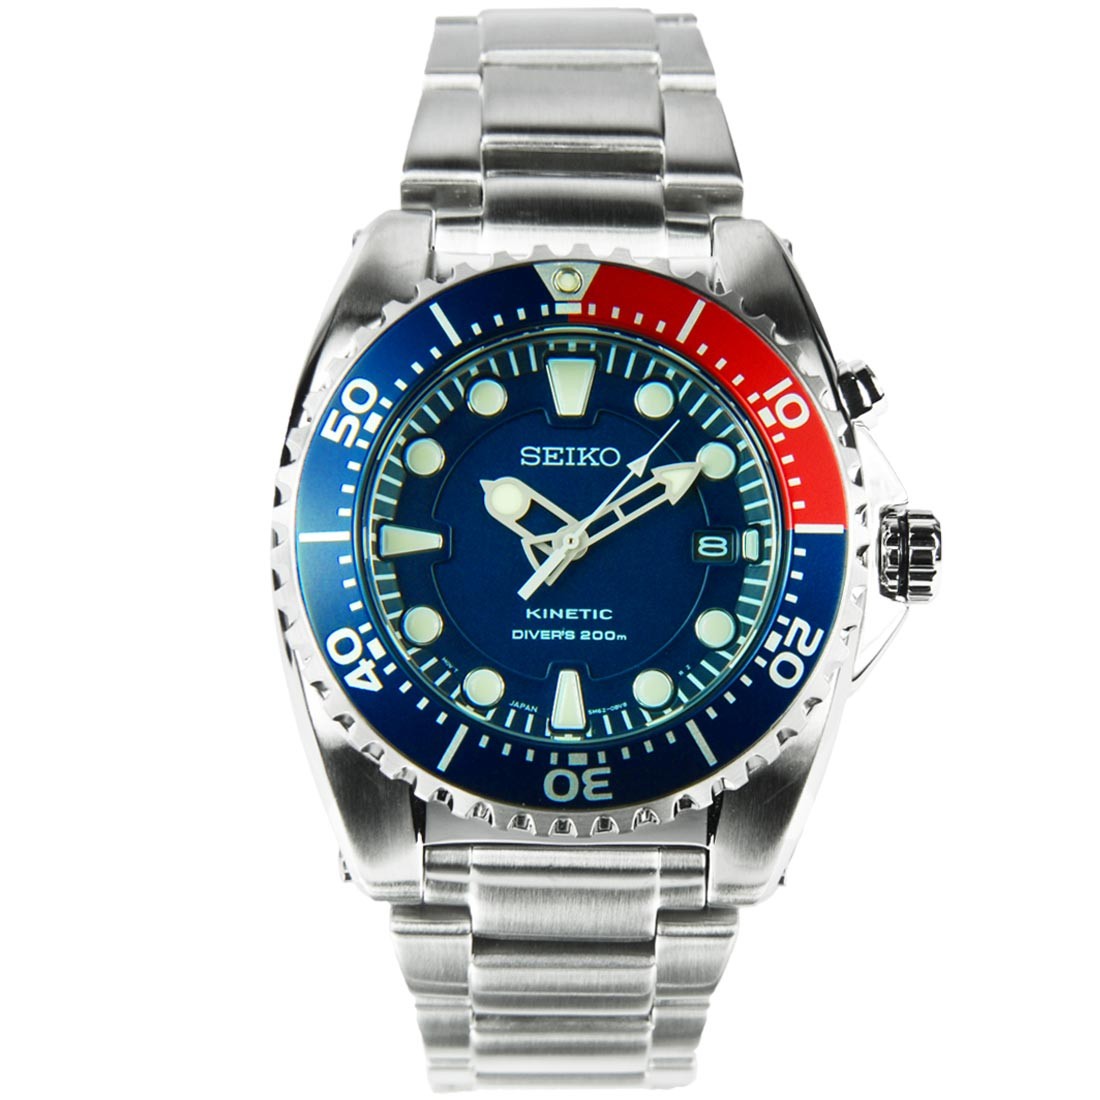 Top 10 Seiko Men's Kinetic Watches - The Watch Blog